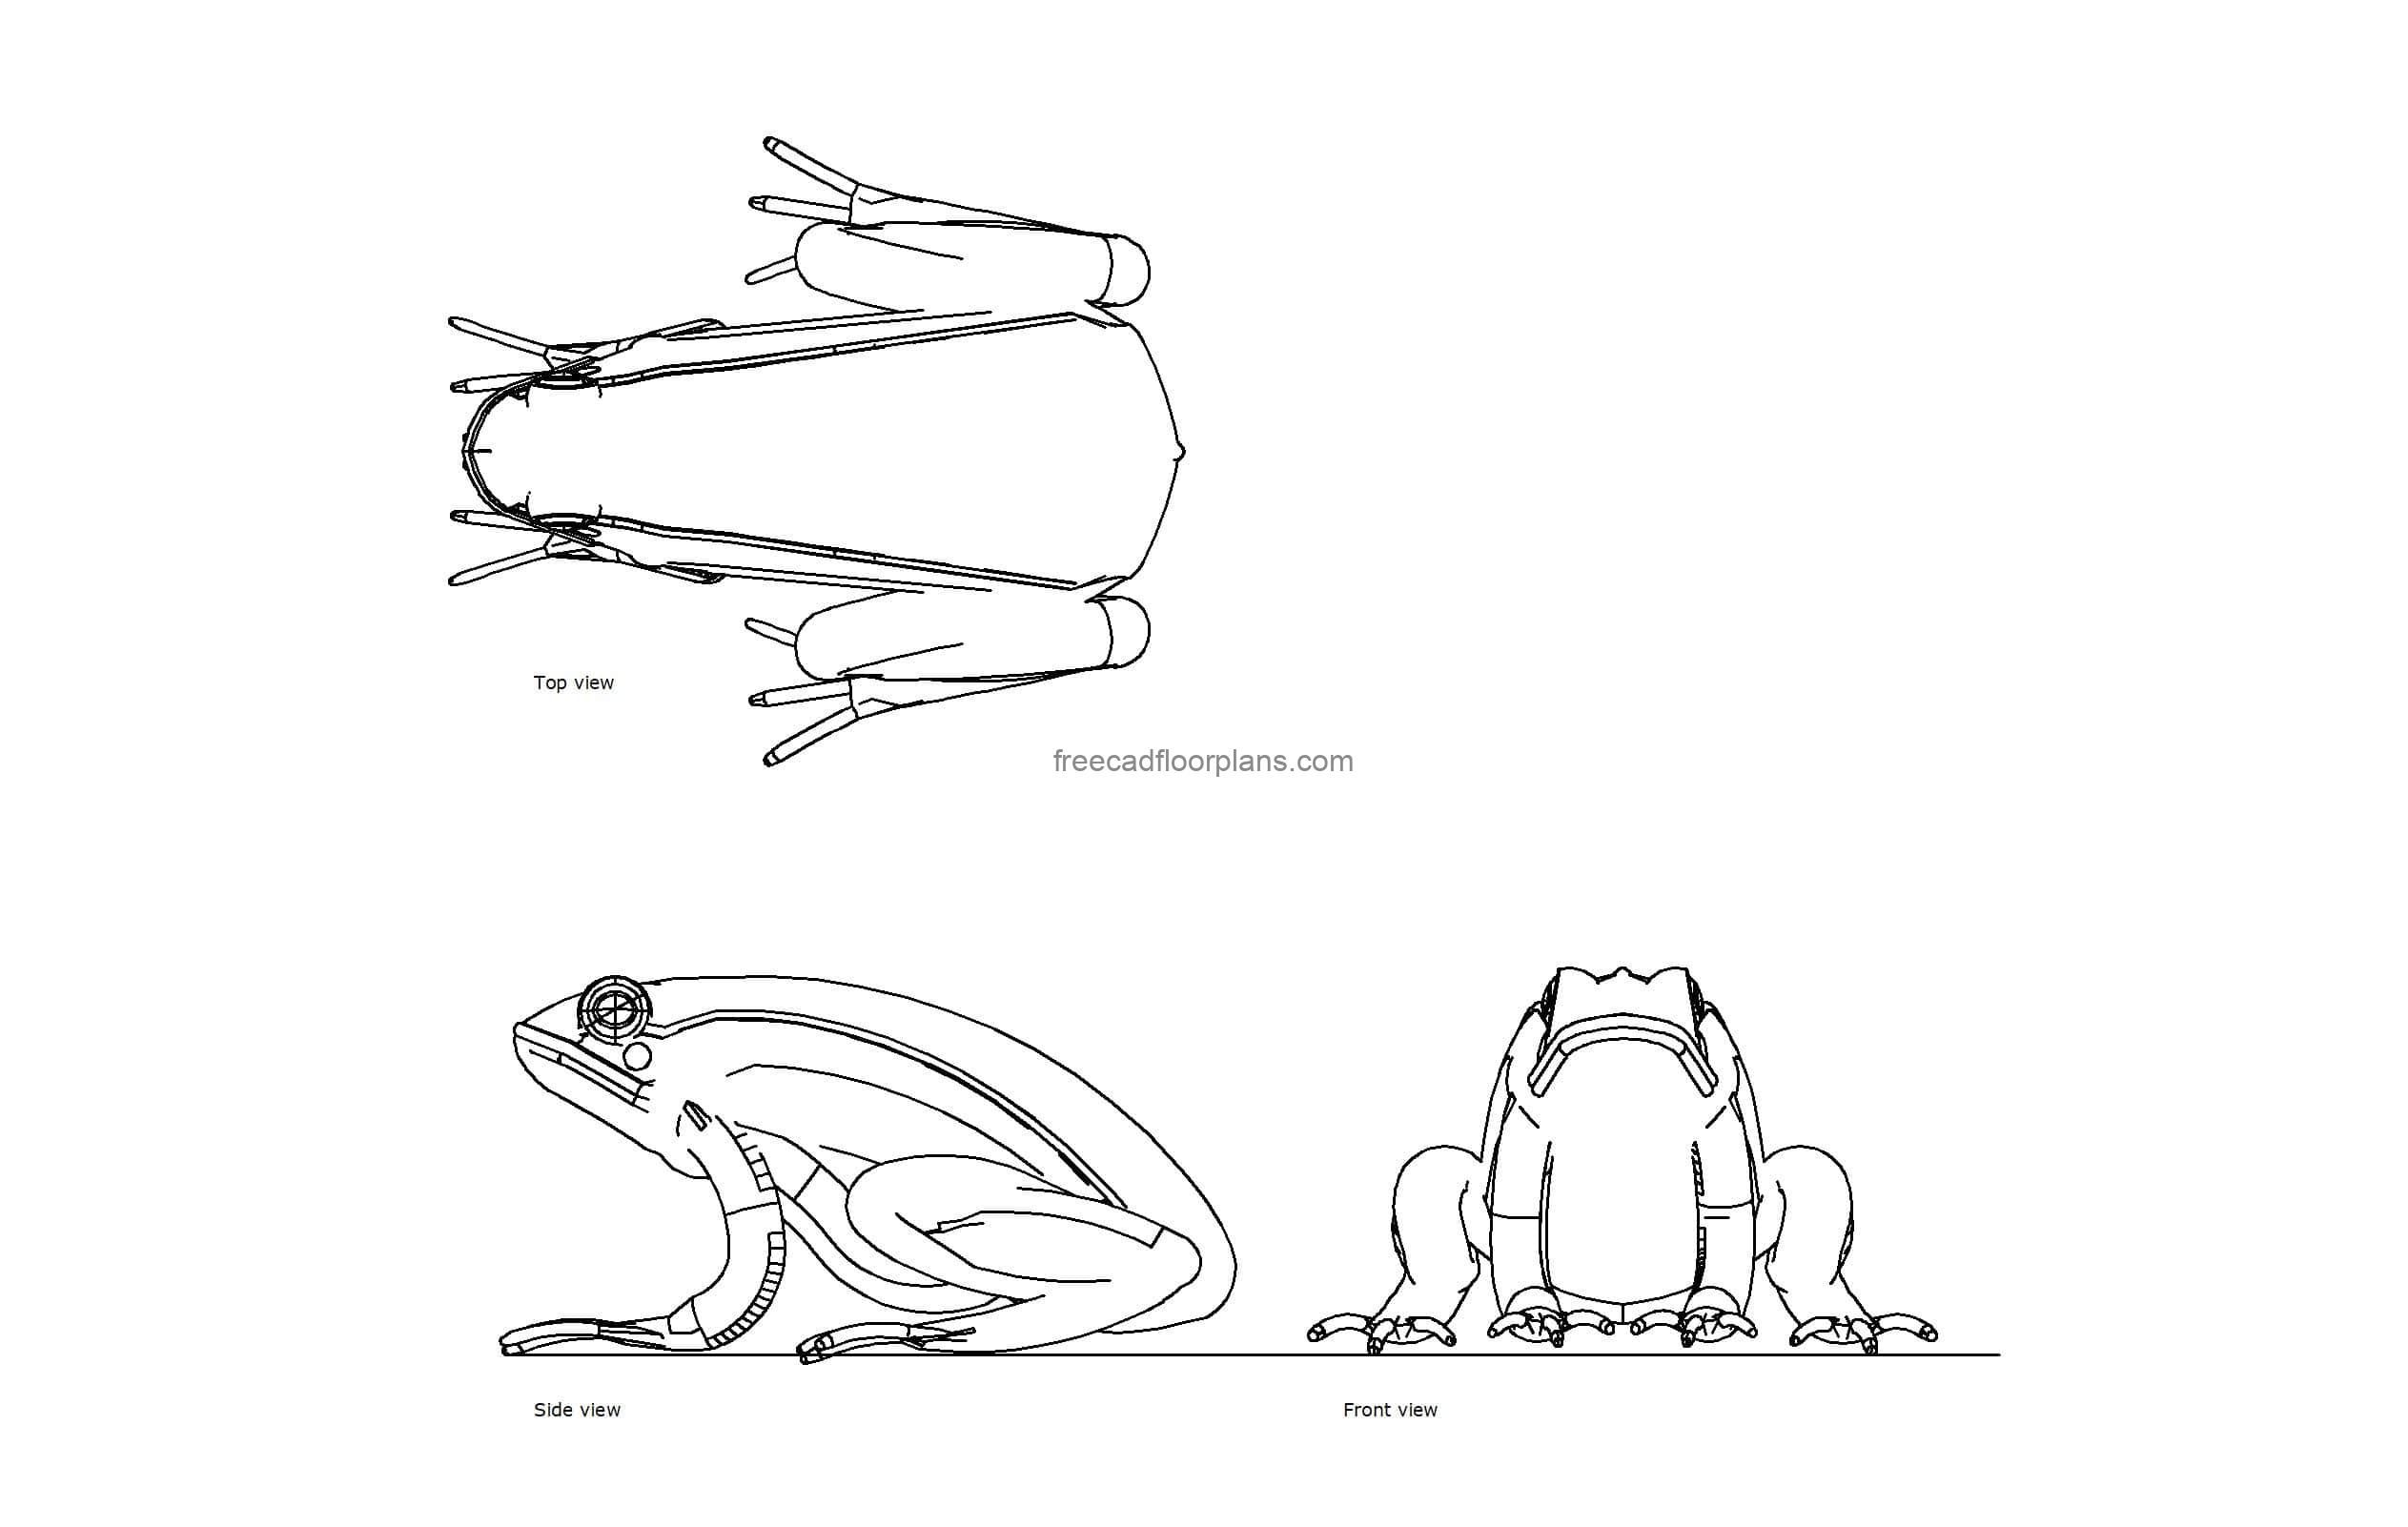 autocad drawing of a frog, plan and elevation 2d views, dwg file free for download